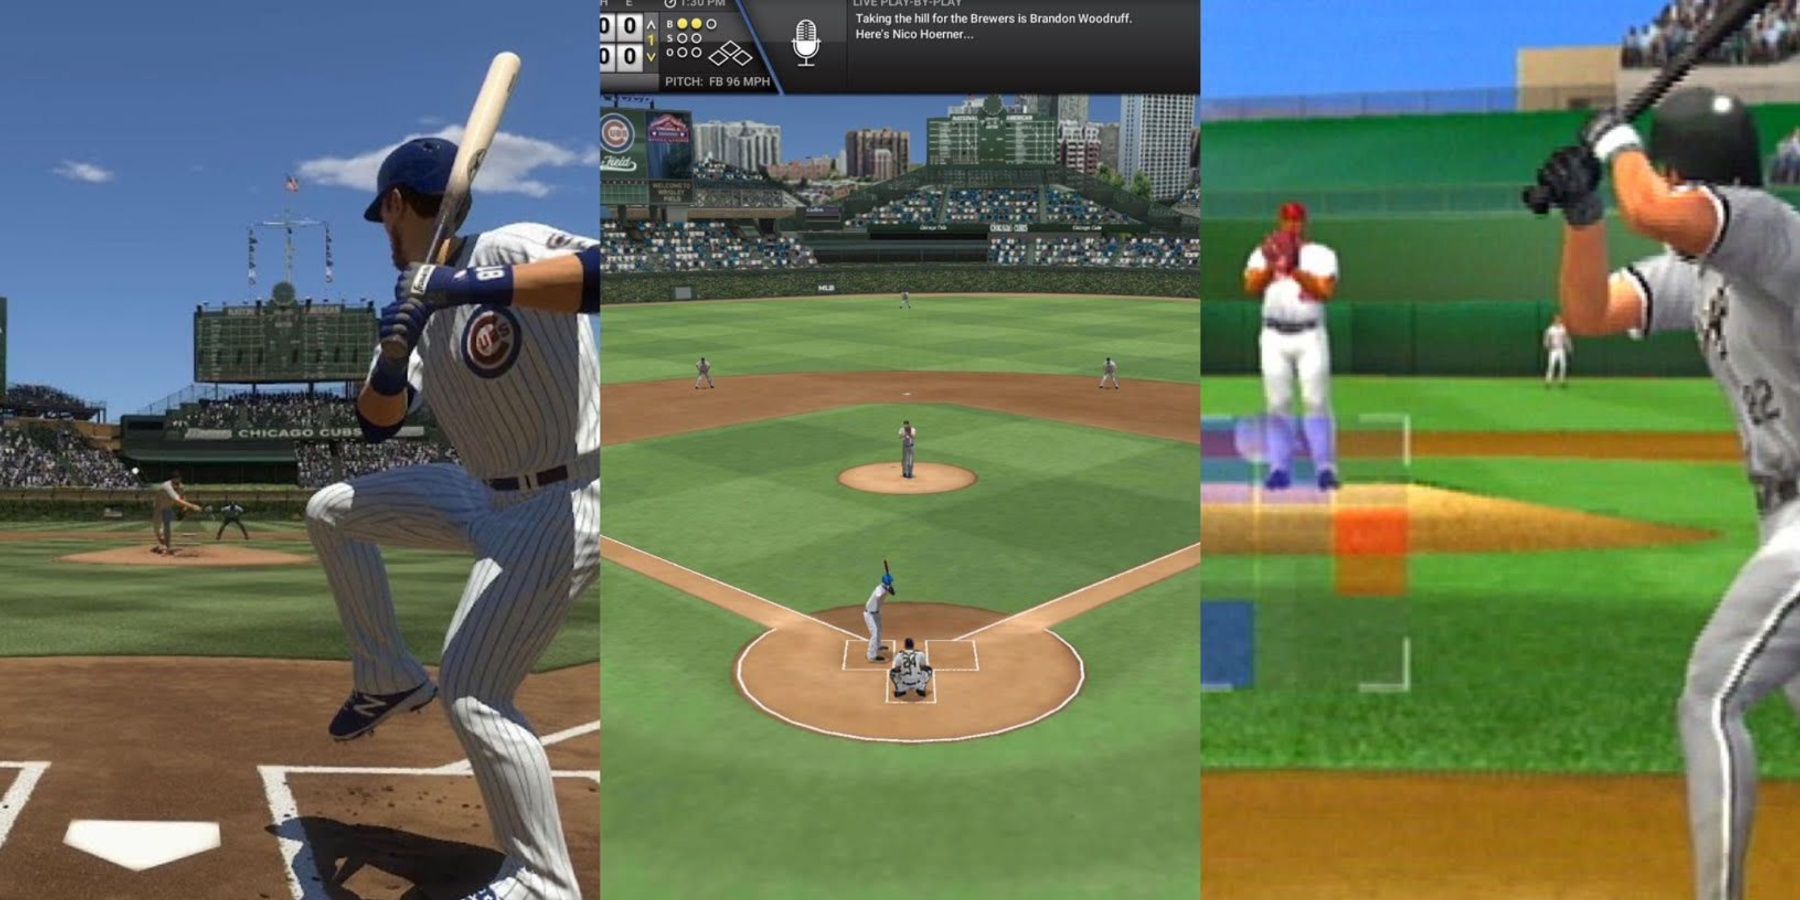 This is Why MVP 2005 is the Greatest Baseball Game of All Time